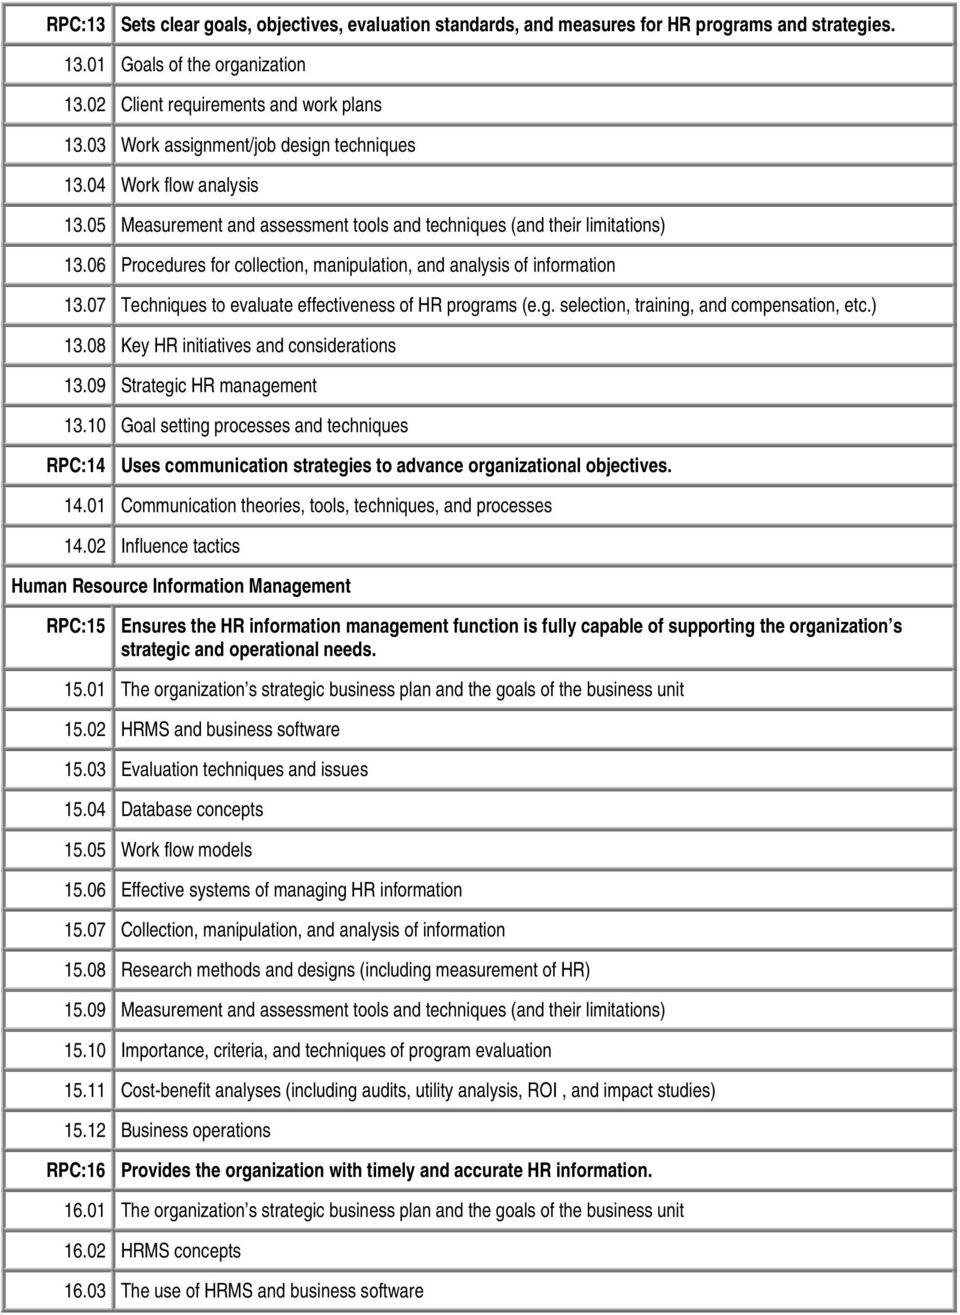 06 Procedures for collection, manipulation, and analysis of information 13.07 Techniques to evaluate effectiveness of HR programs (e.g. selection, training, and compensation, etc.) 13.